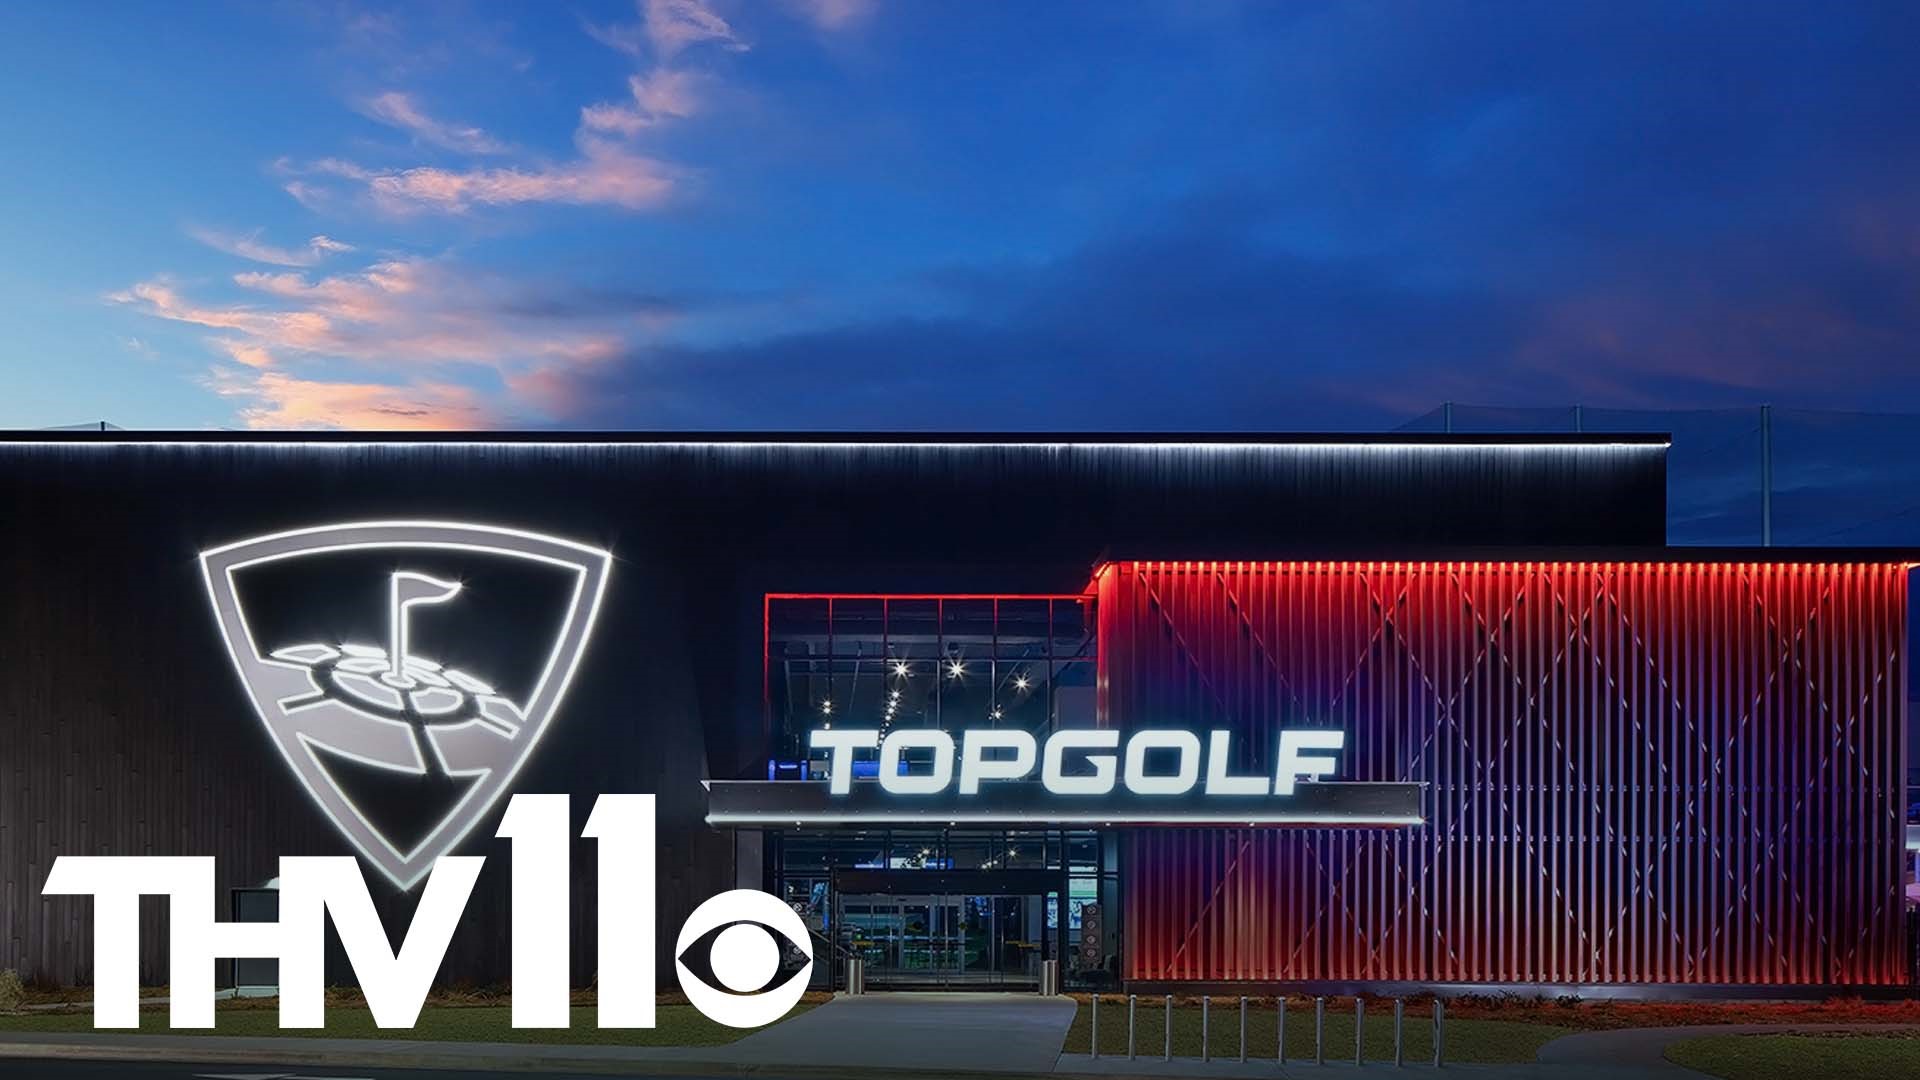 Months after Topgolf announced that it'll be coming to Little Rock, we finally know where it will be located in the city.